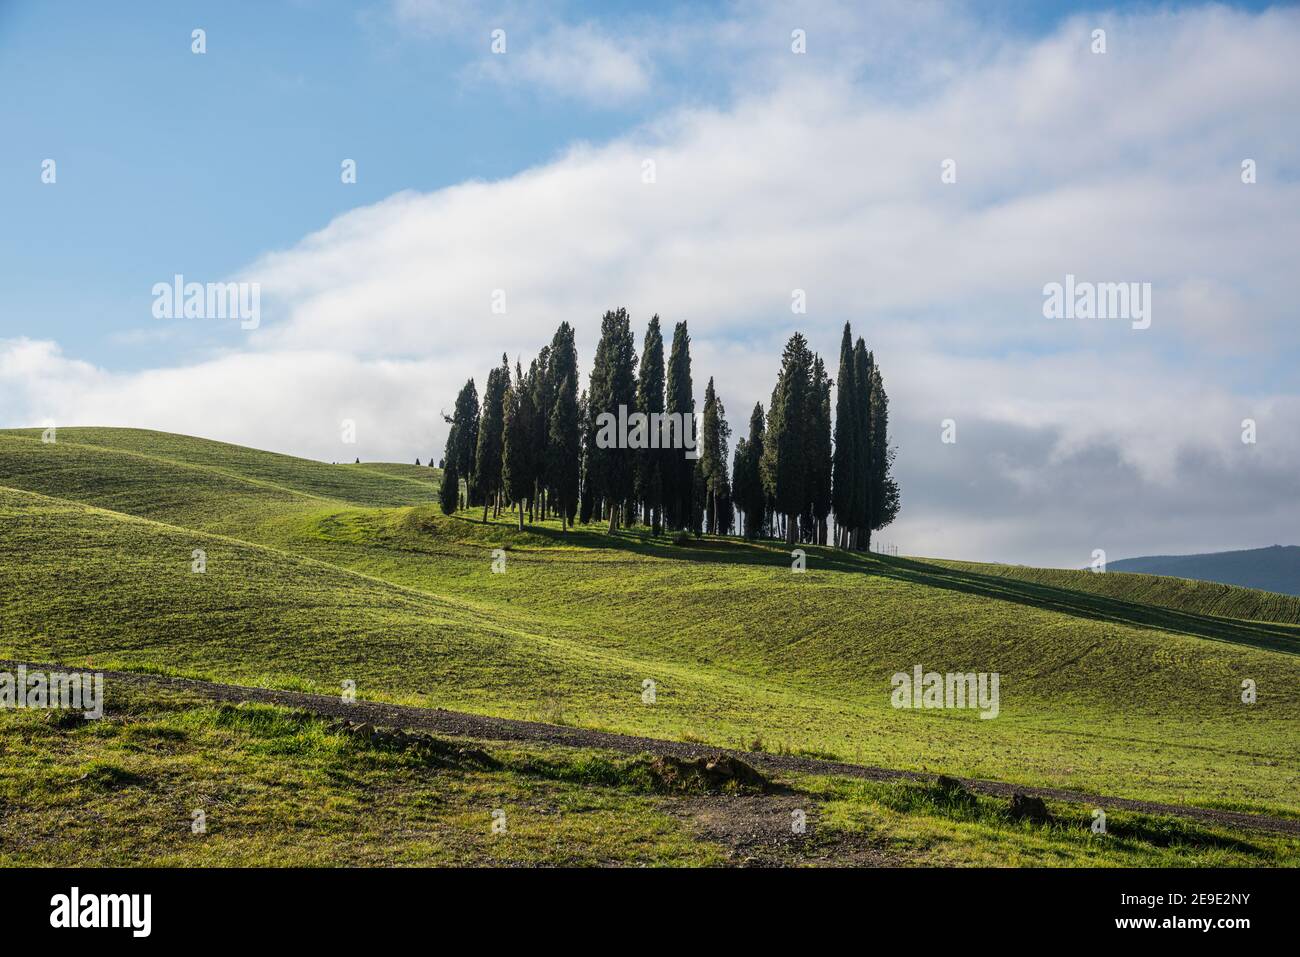 Cypresses, typical trees in Val d'Orcia Stock Photo